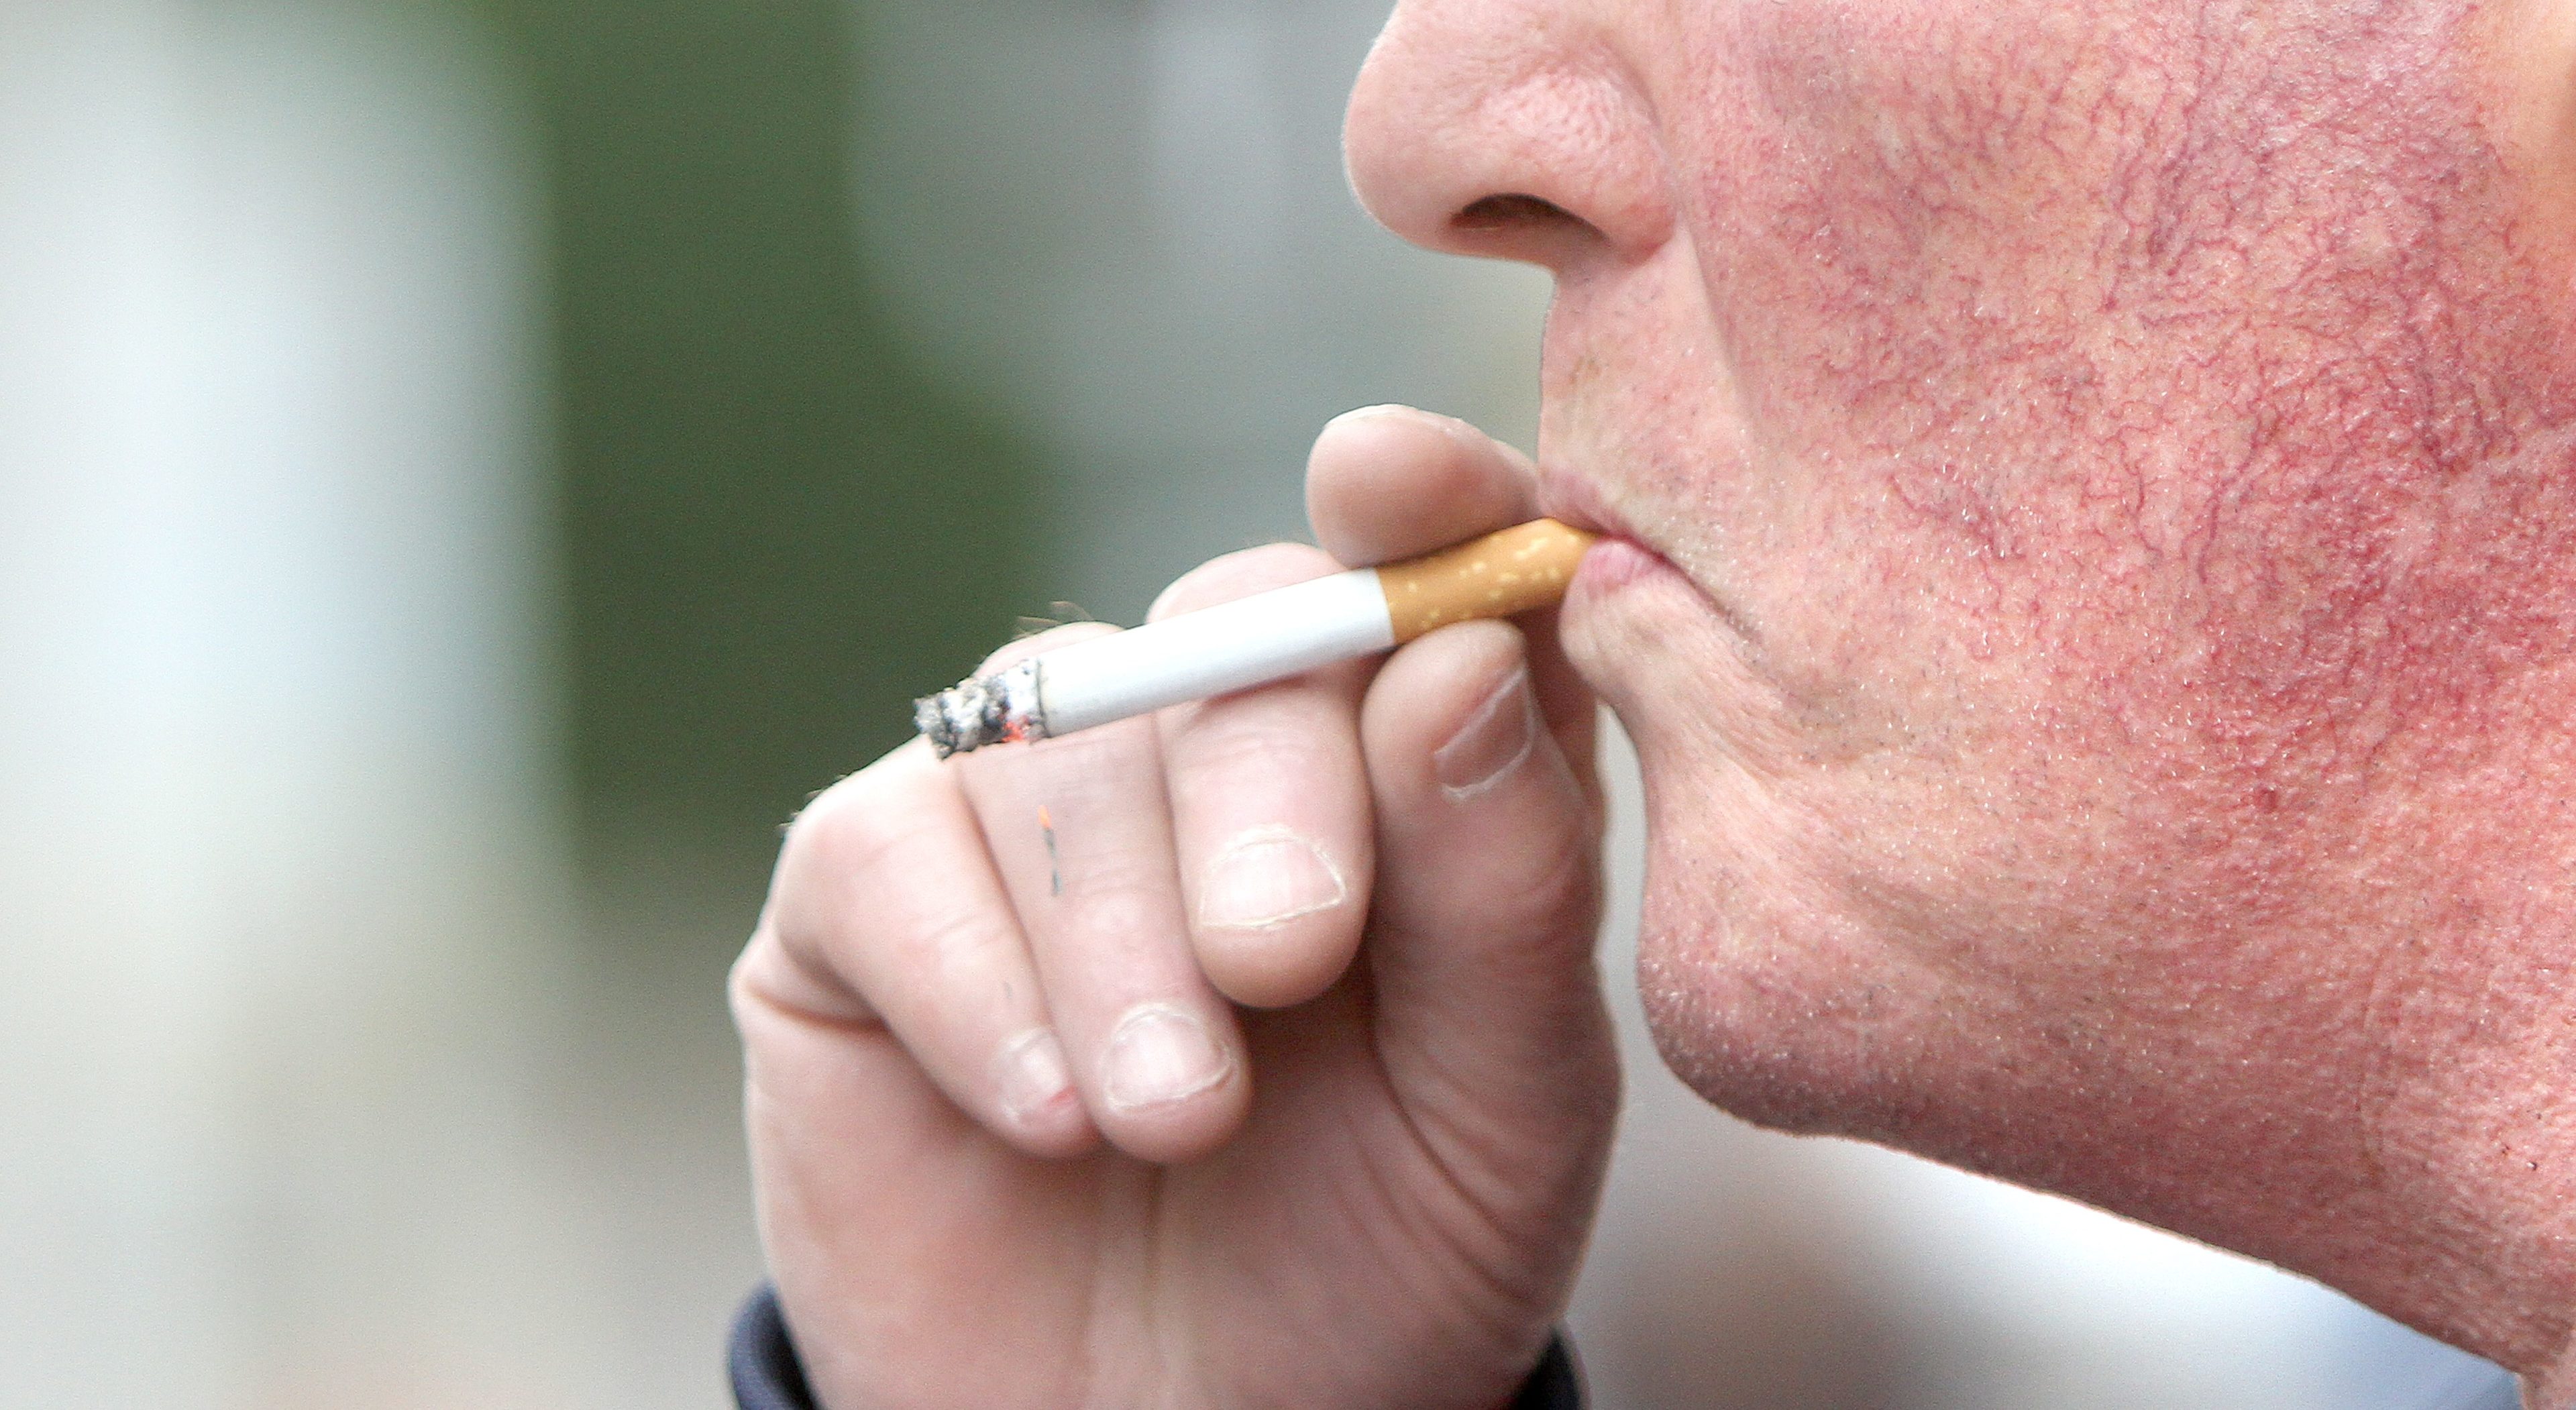 There are 942,644 smokers in Scotland, according to 2016 data.